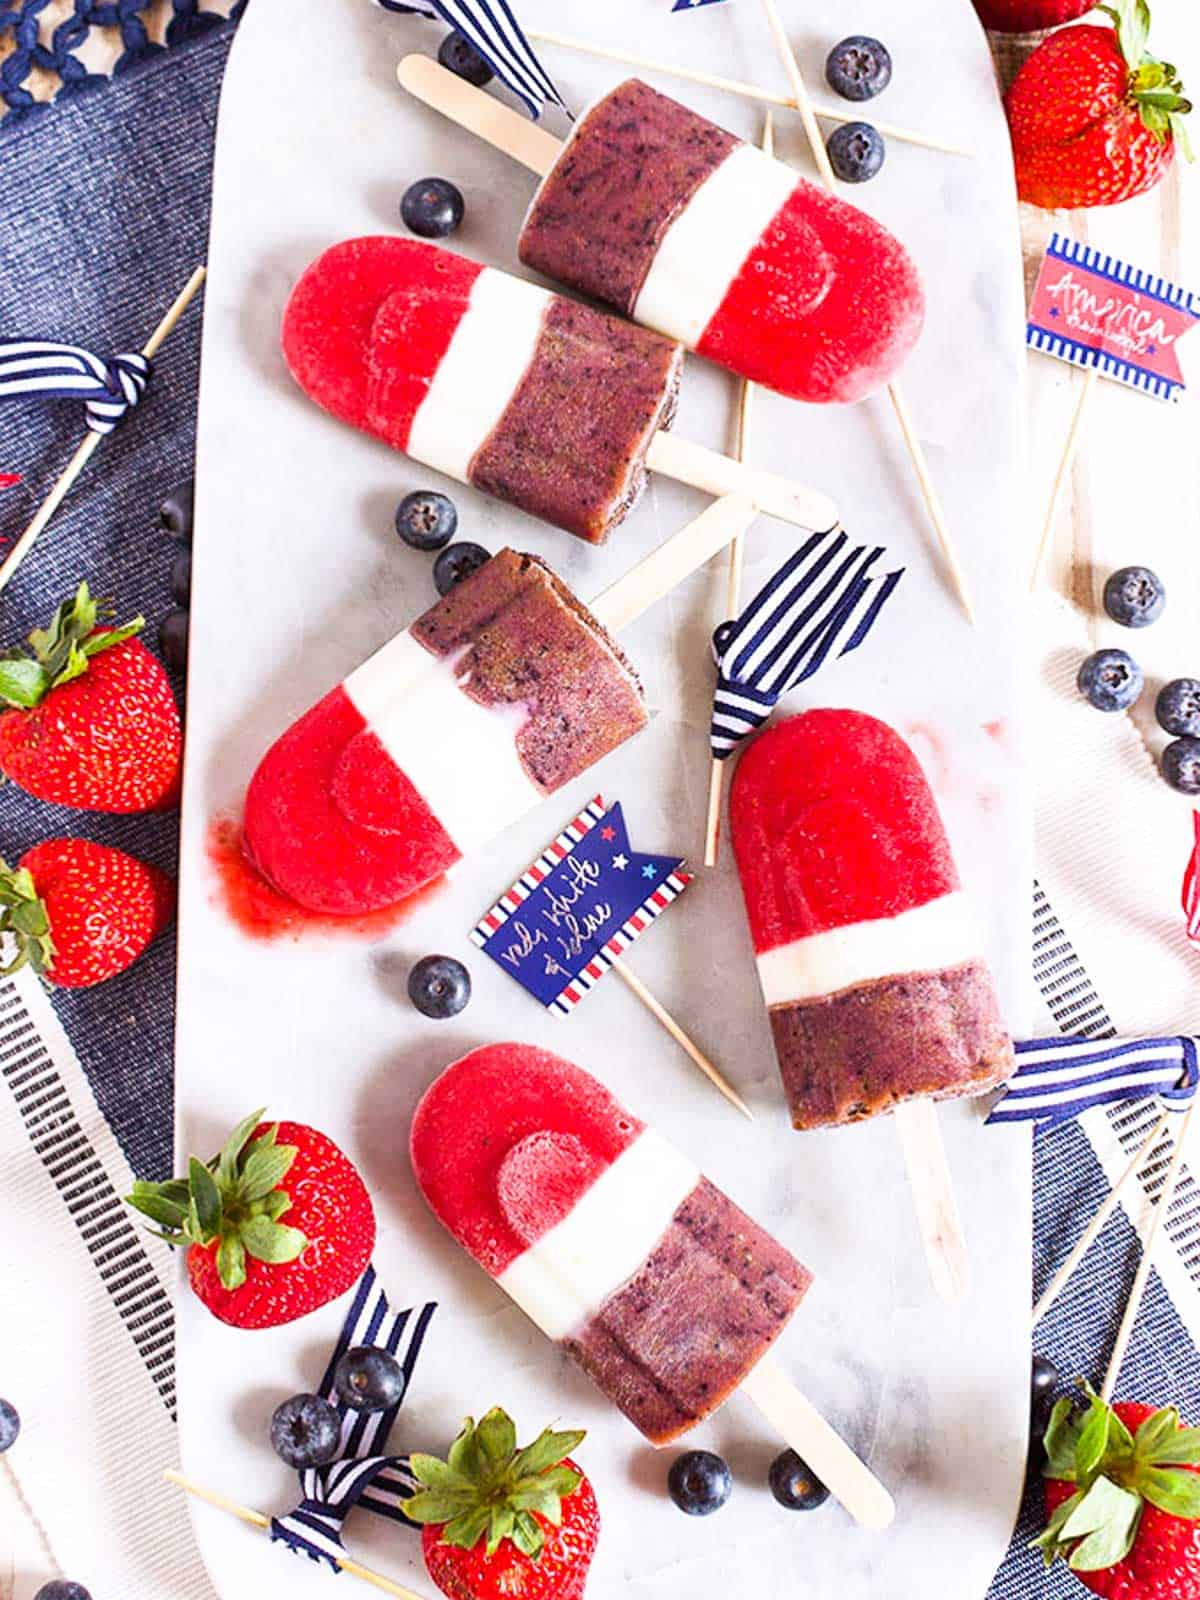 Five red white blue smoothie popsicles on a tray with strawberries.